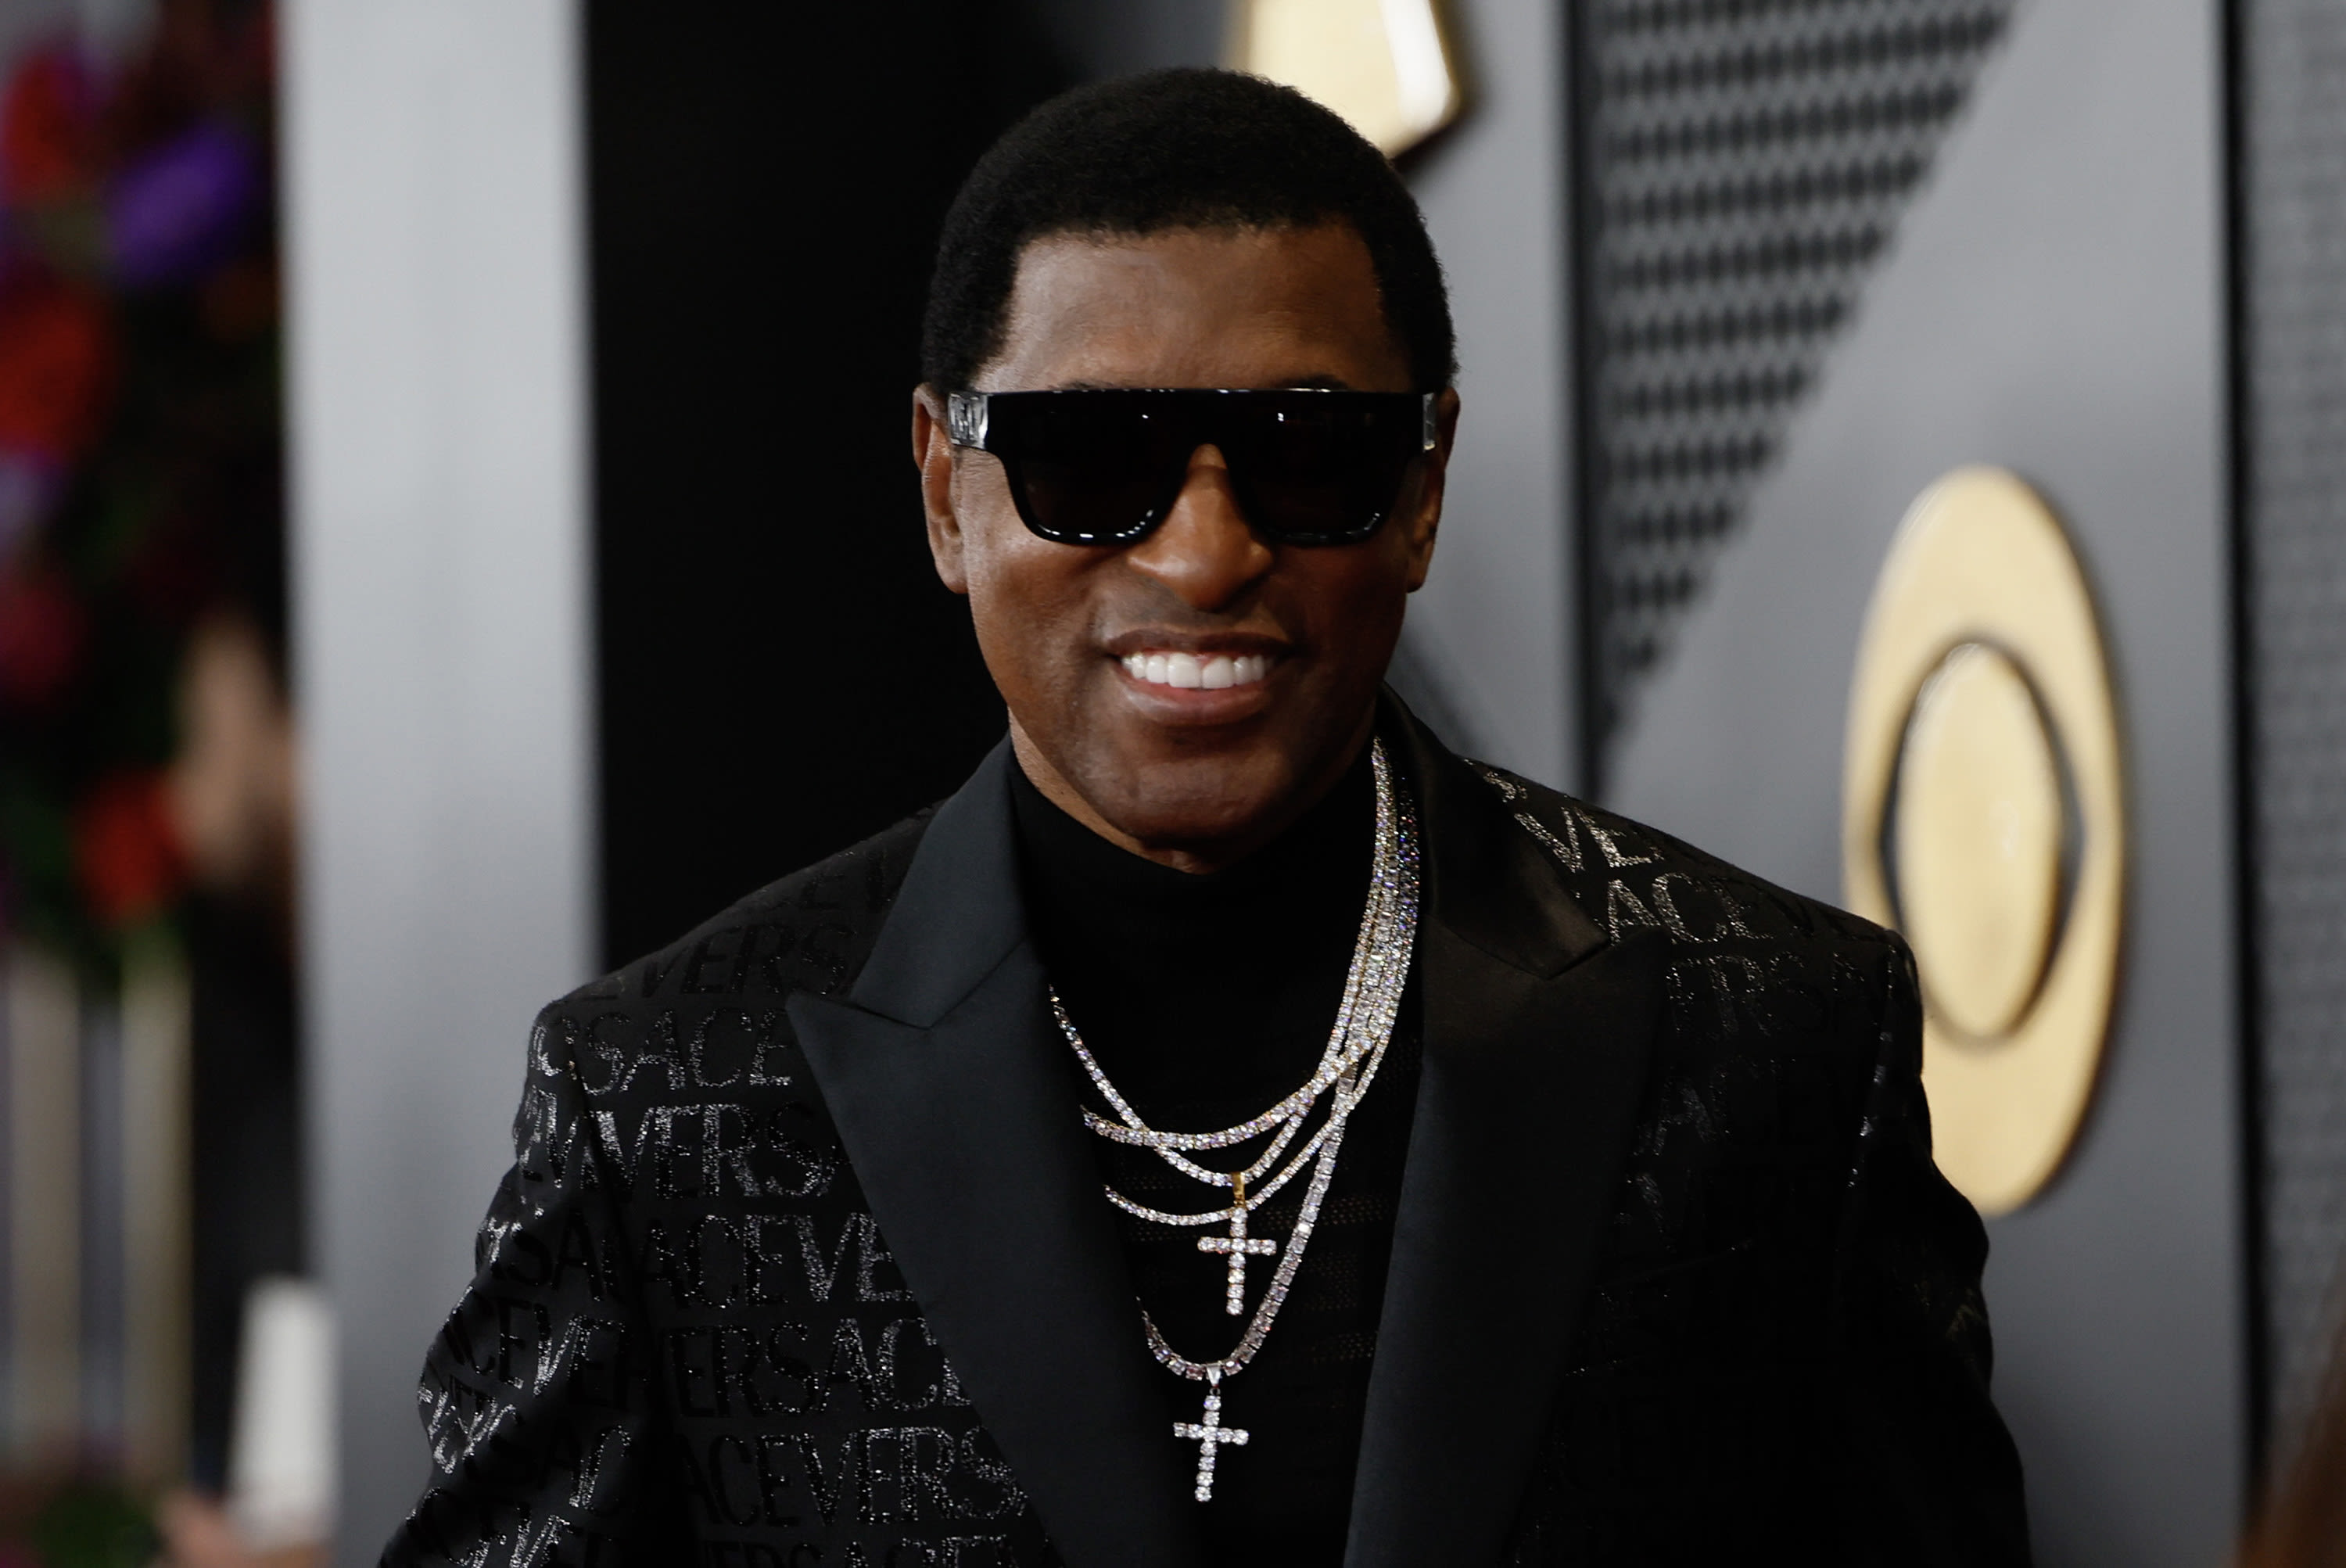 Babyface, Usher to be honored at Apollo gala, superstar lineup announced